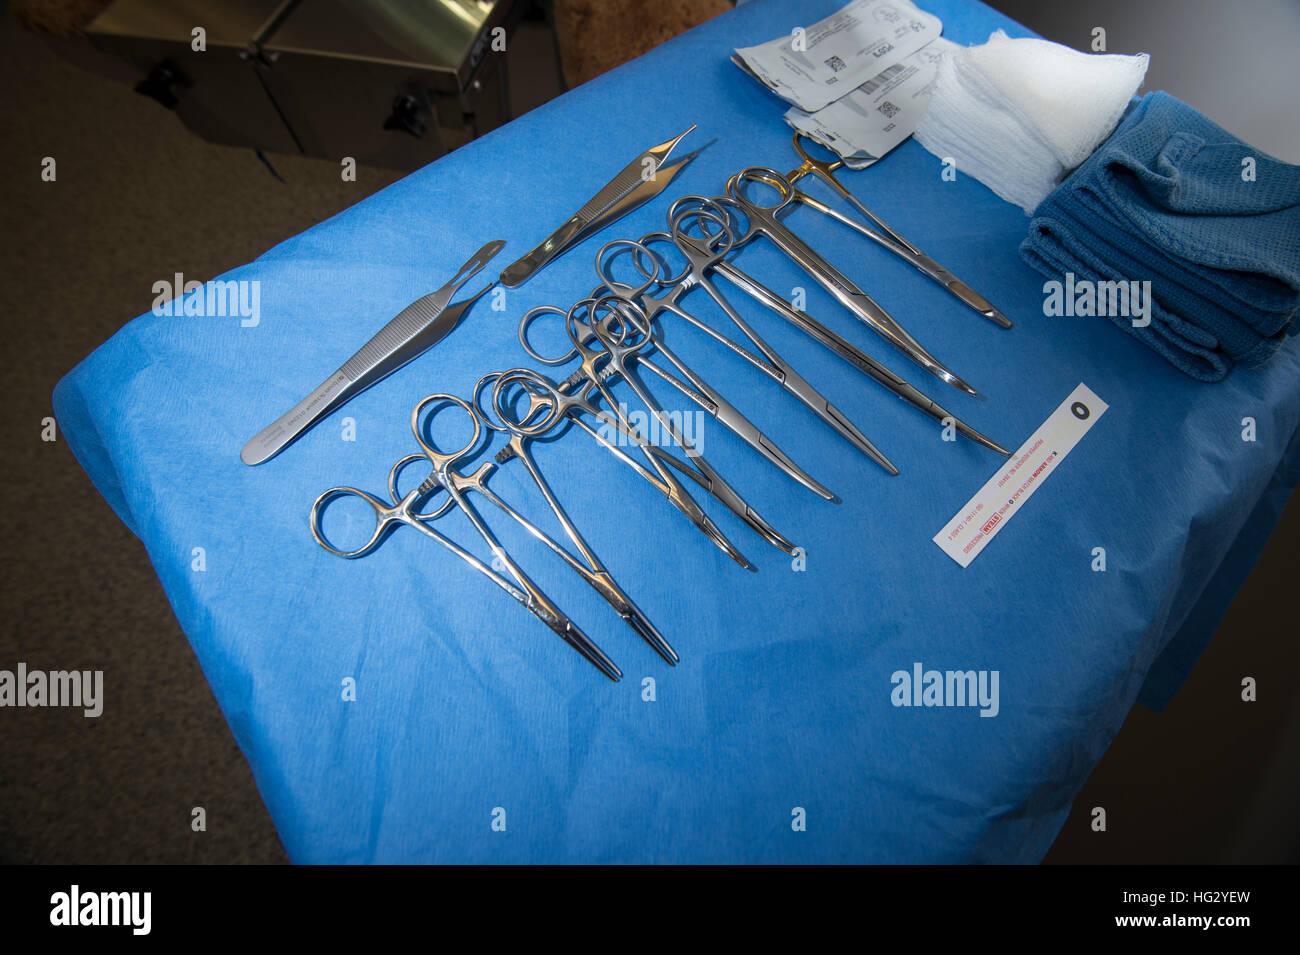 Surgical Instruments In Operating Room, USA Stock Photo